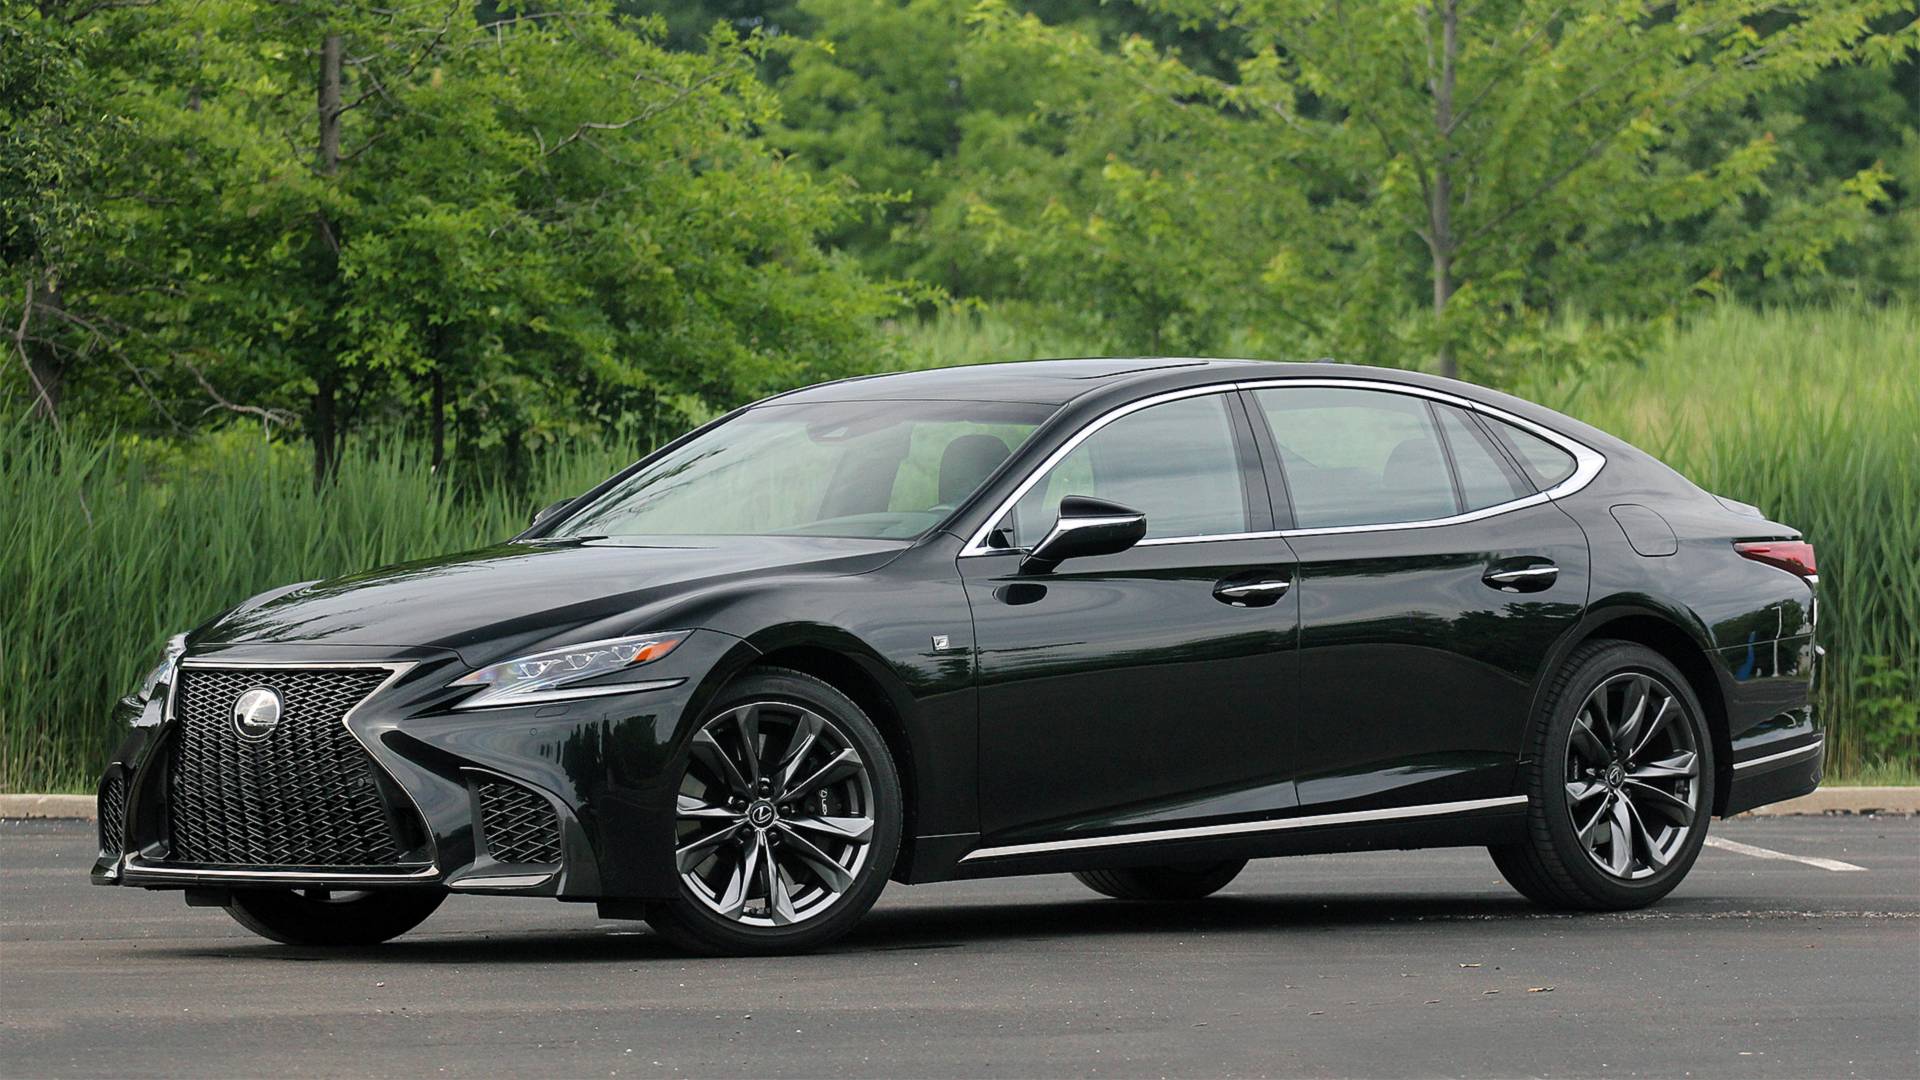 2018 Lexus LS 500 F Sport: Middle Of The Pack